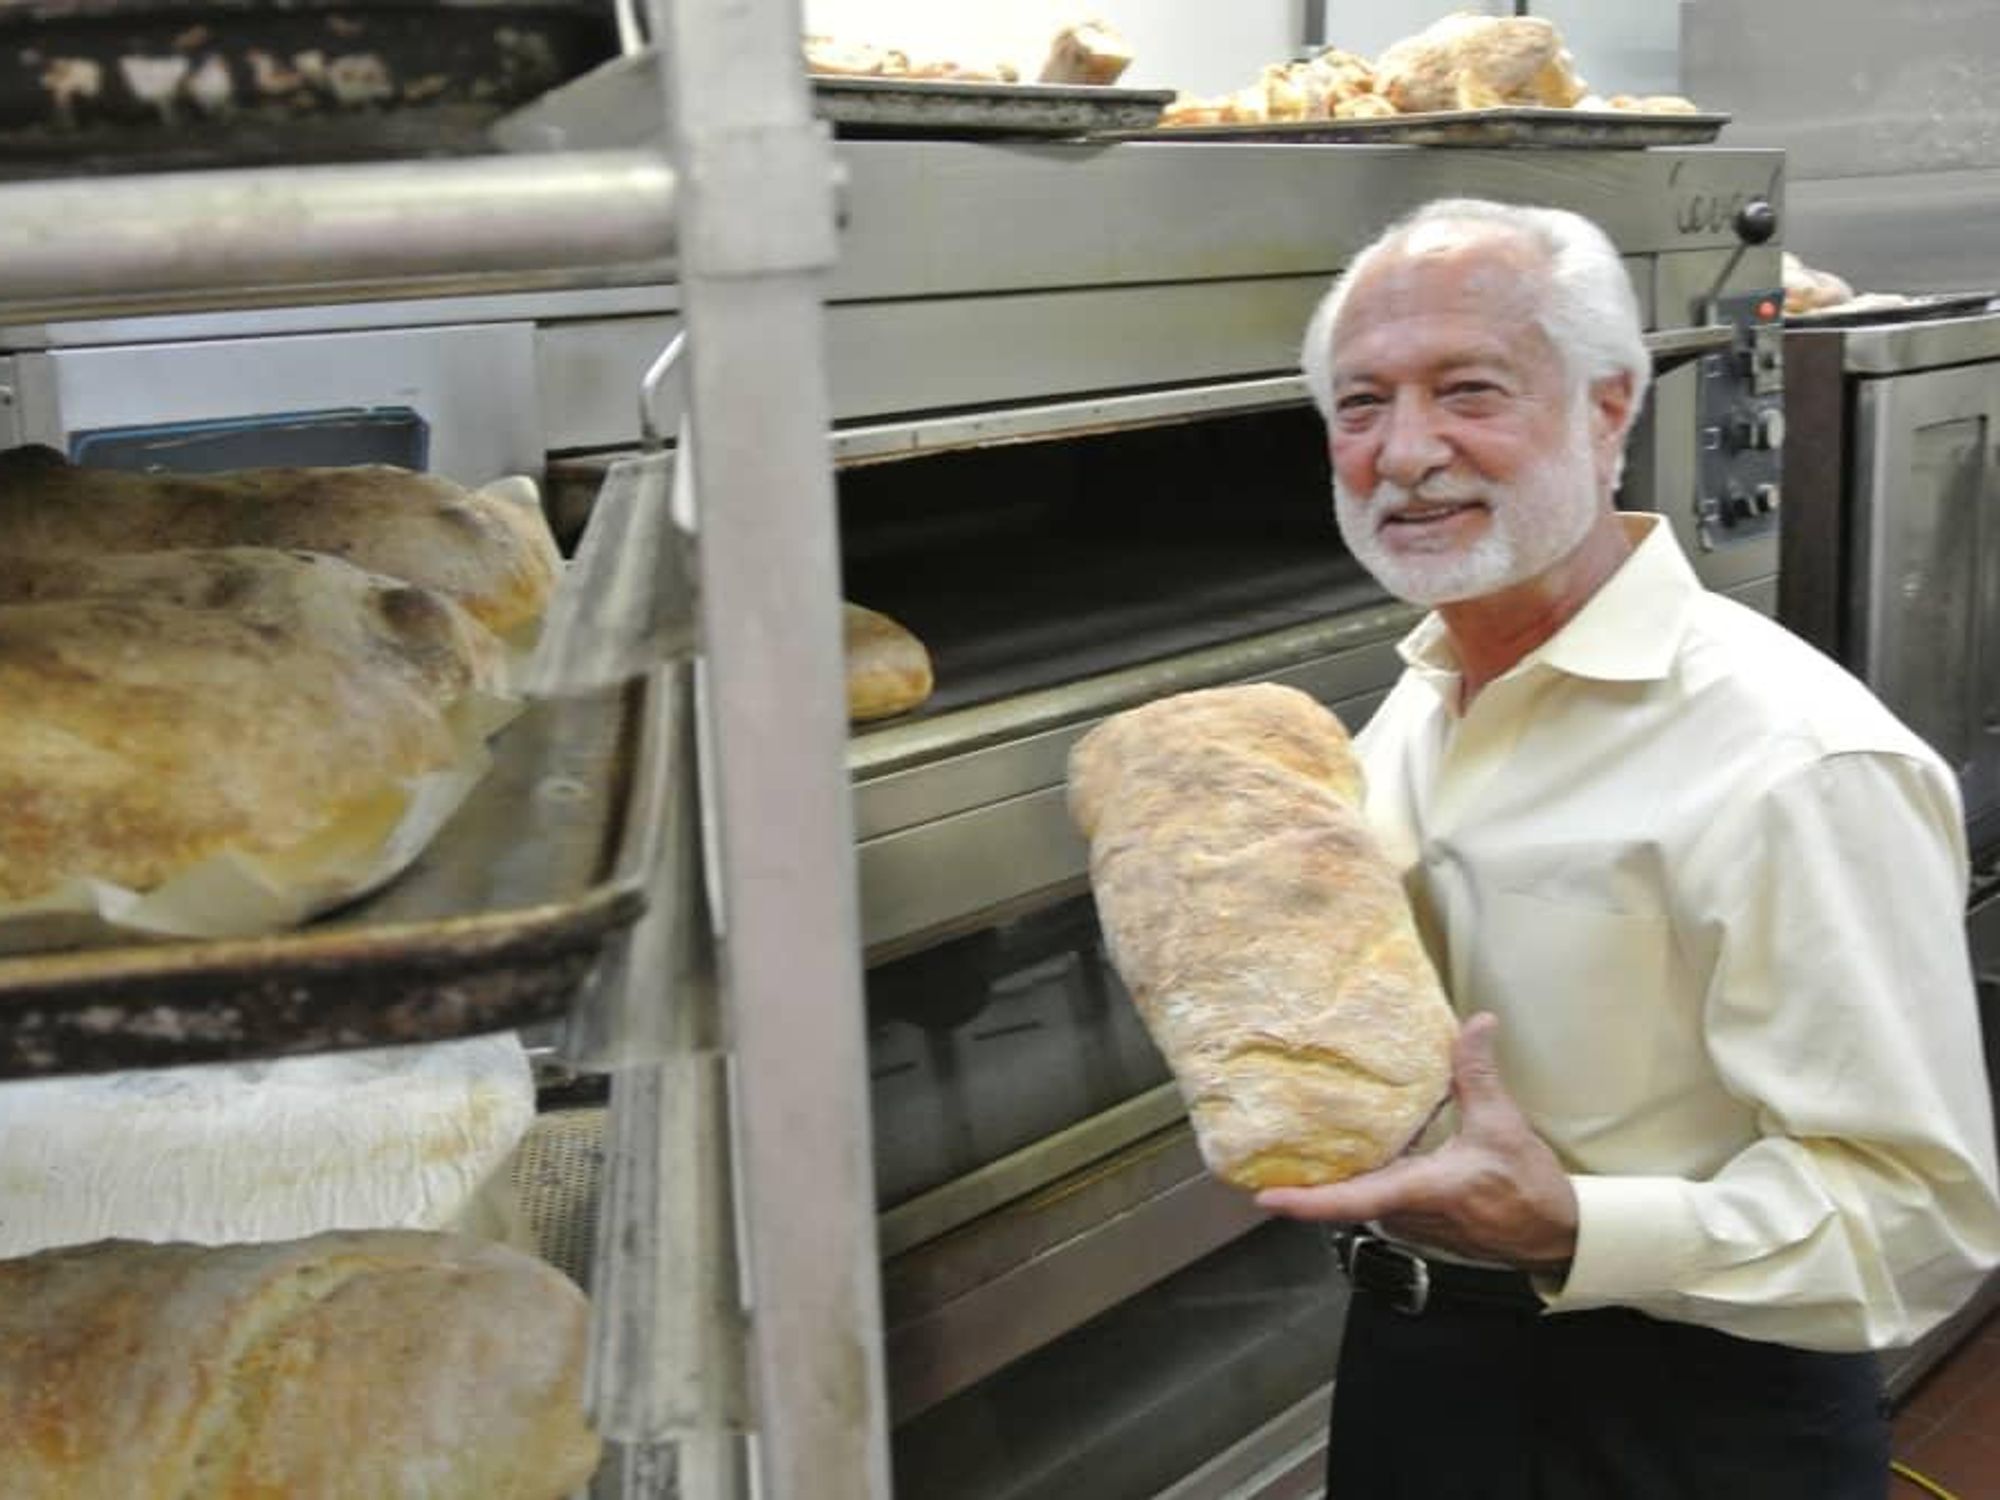 Vincent Mandola of Nino’s and Vincent’s, holding the Grand Prize, the Ciabatta loaf.